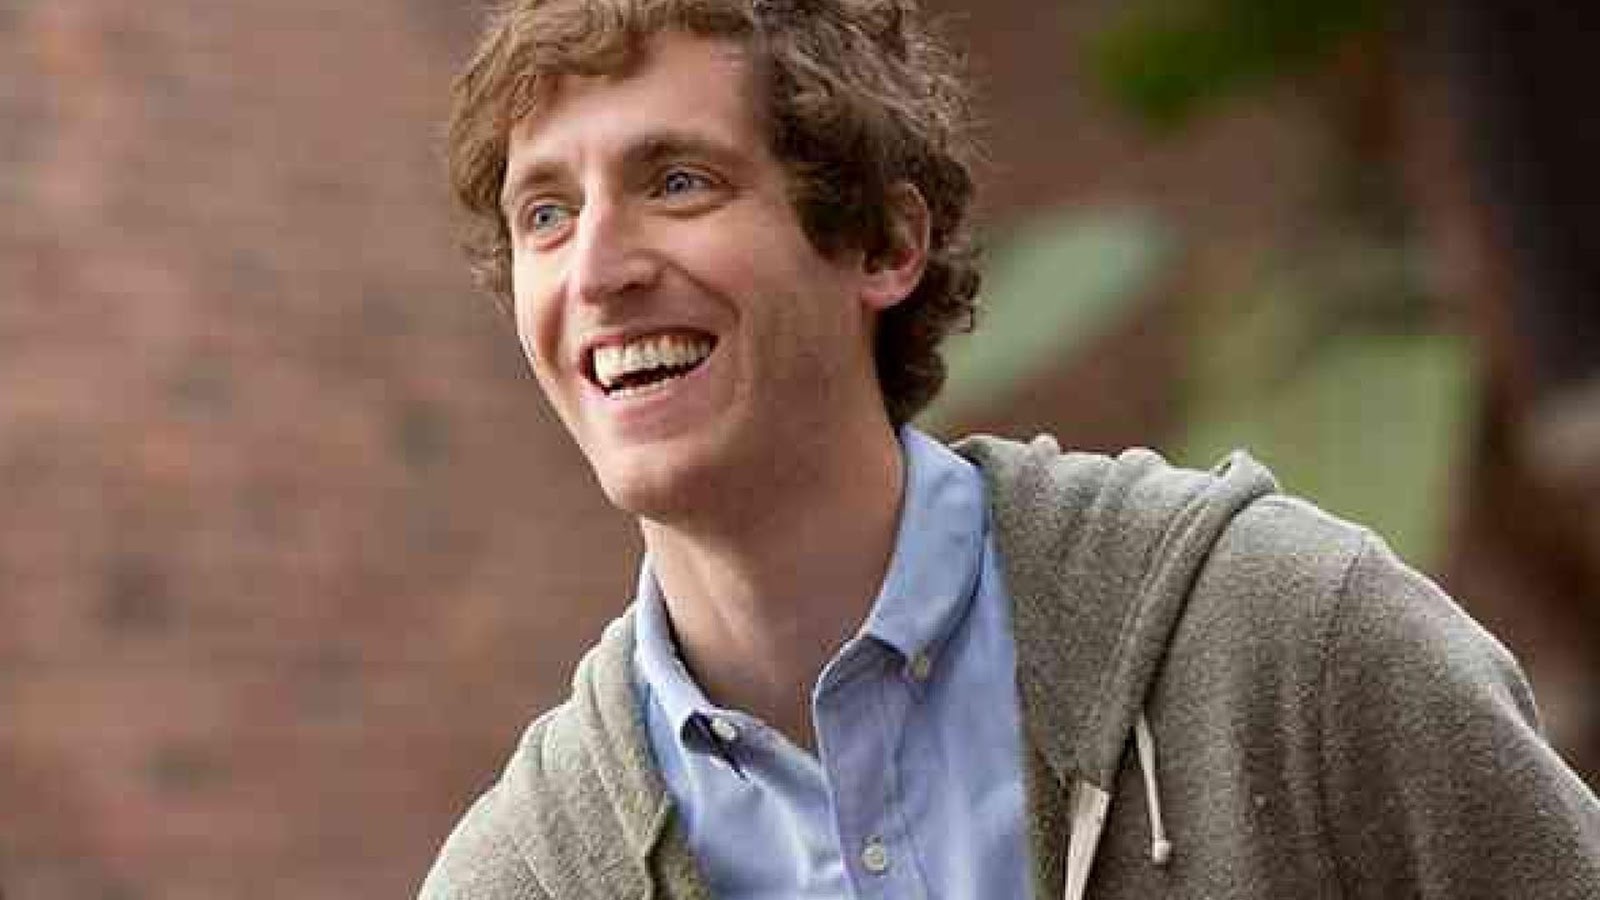 Thomas Middleditch  Upcoming Movies 2016 'Going Under' Find on wikipedia, imdb, Facebook, Twitter, Google Plus